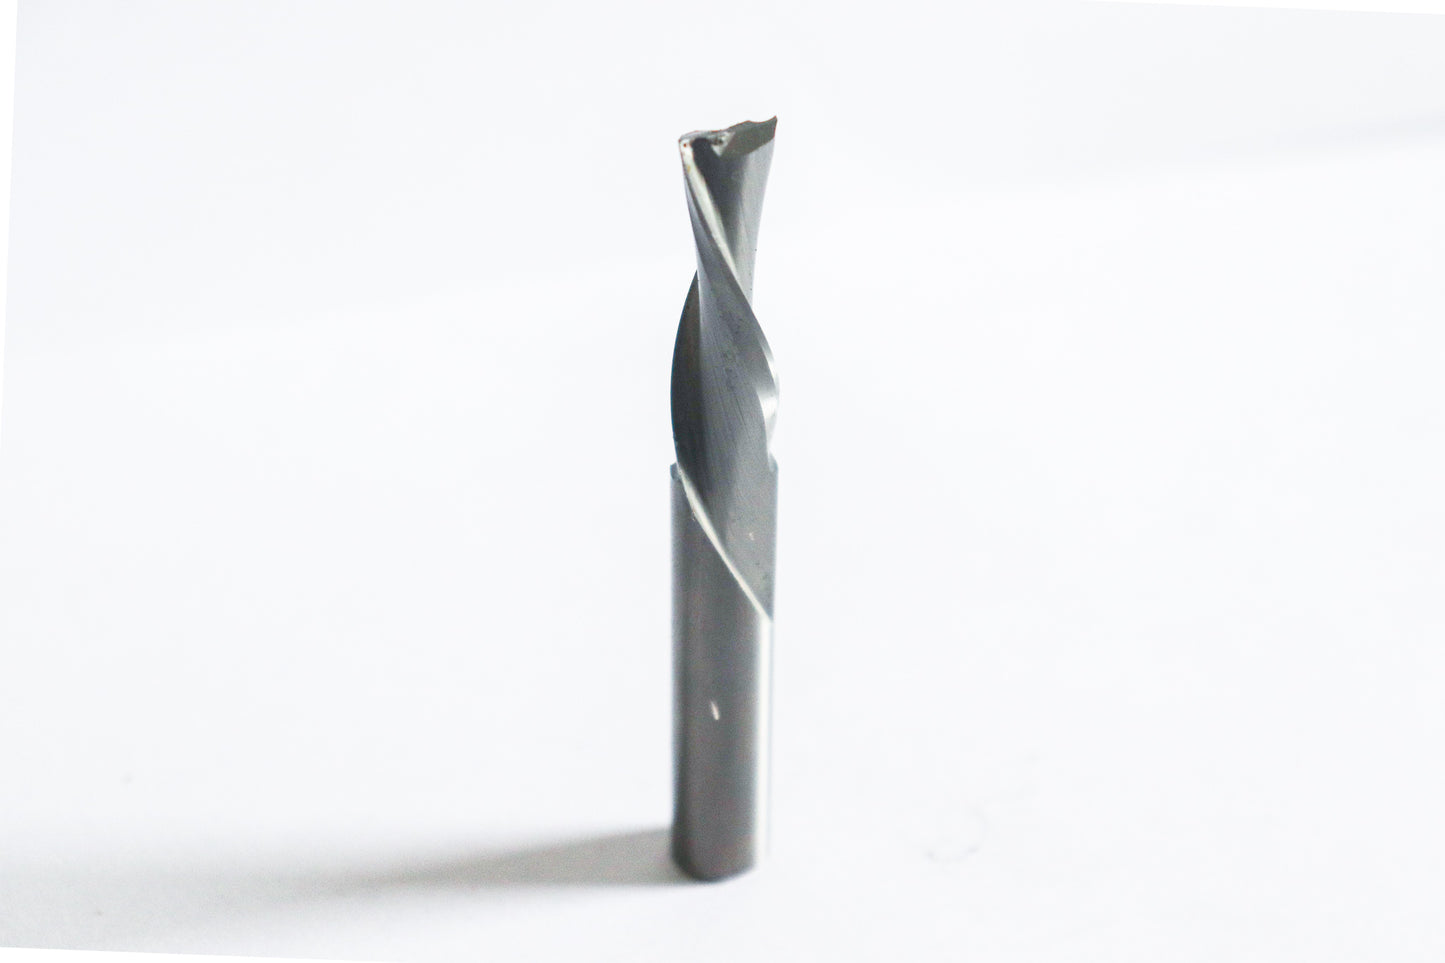 045-2064RX: 2FL Sprial Upcut; 5/8"SH; 5/8"CD; 2"CL; The RX series of bits last 50% longer than other premium CNC bits.